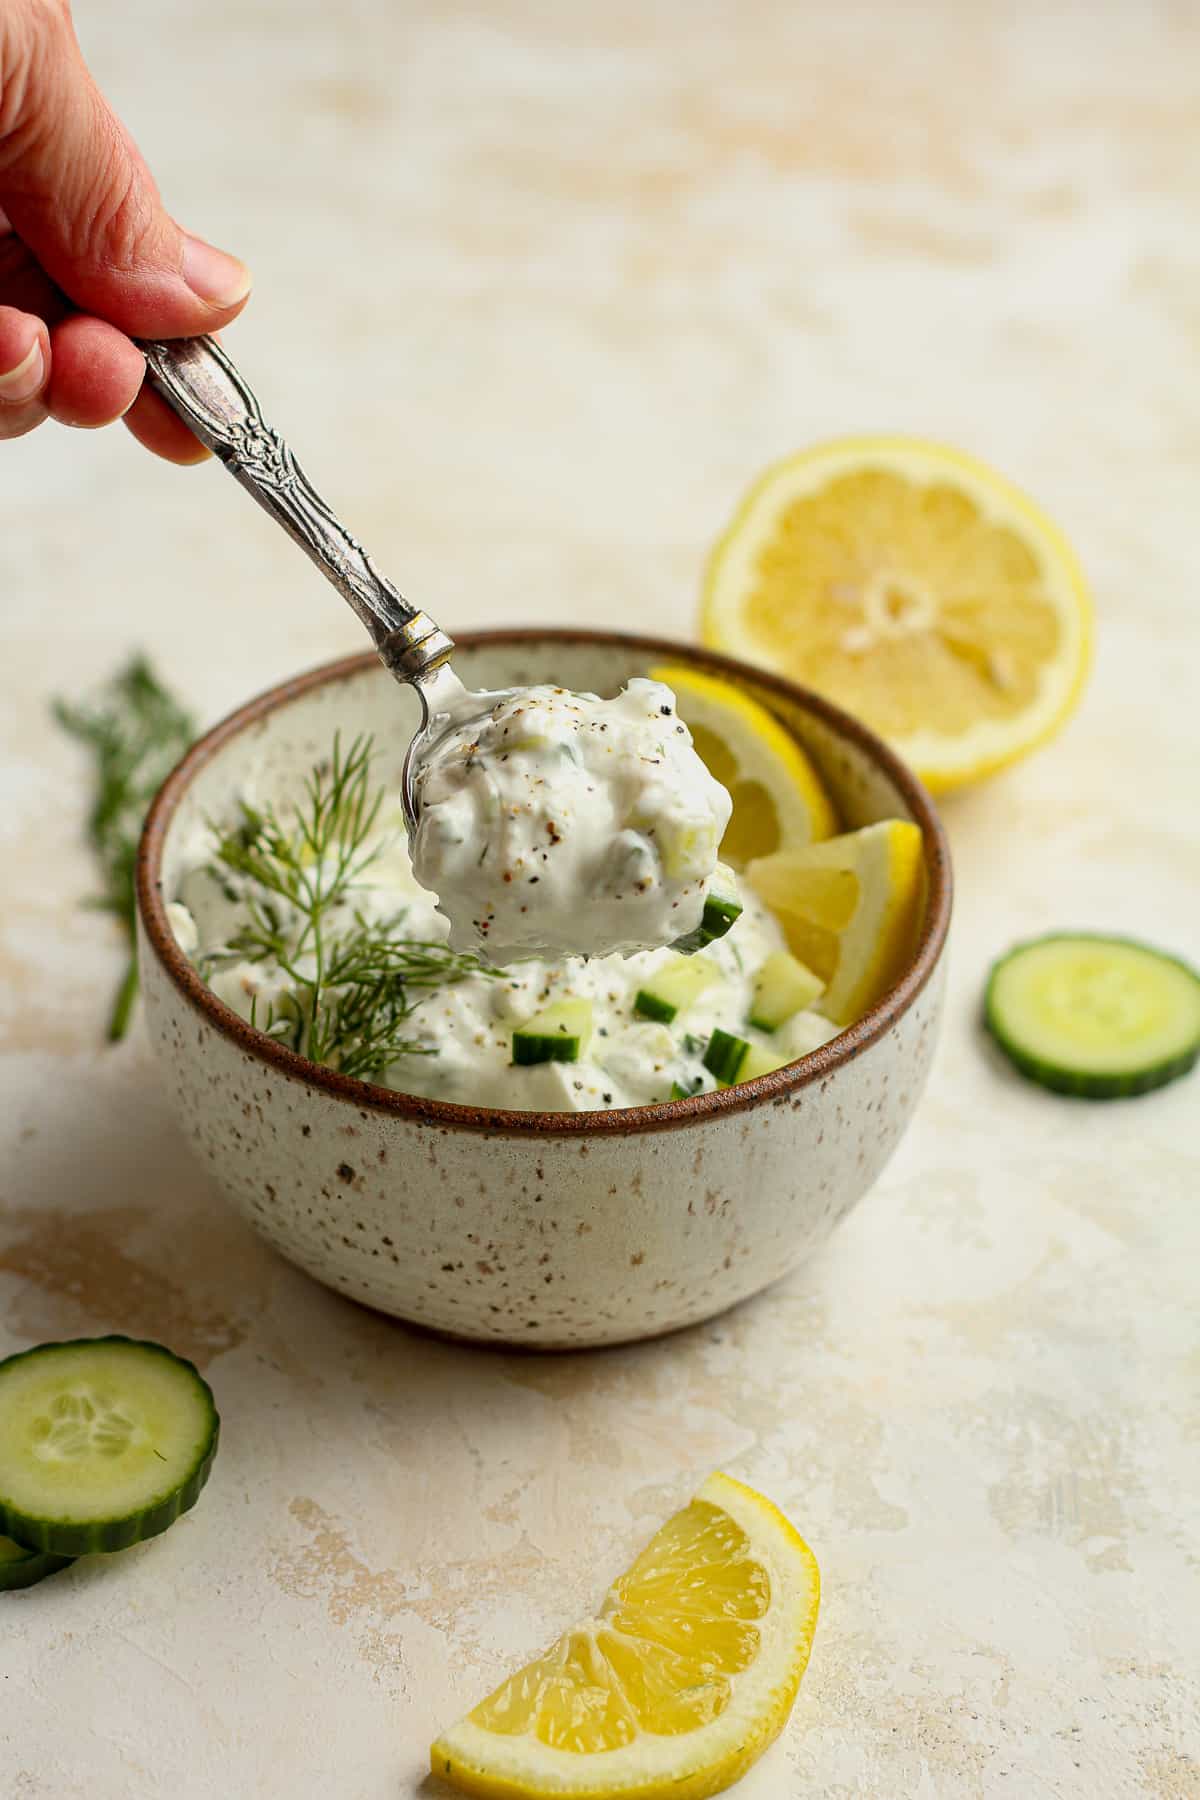 A hand holding some homemade tzatziki sauce with fresh dill.